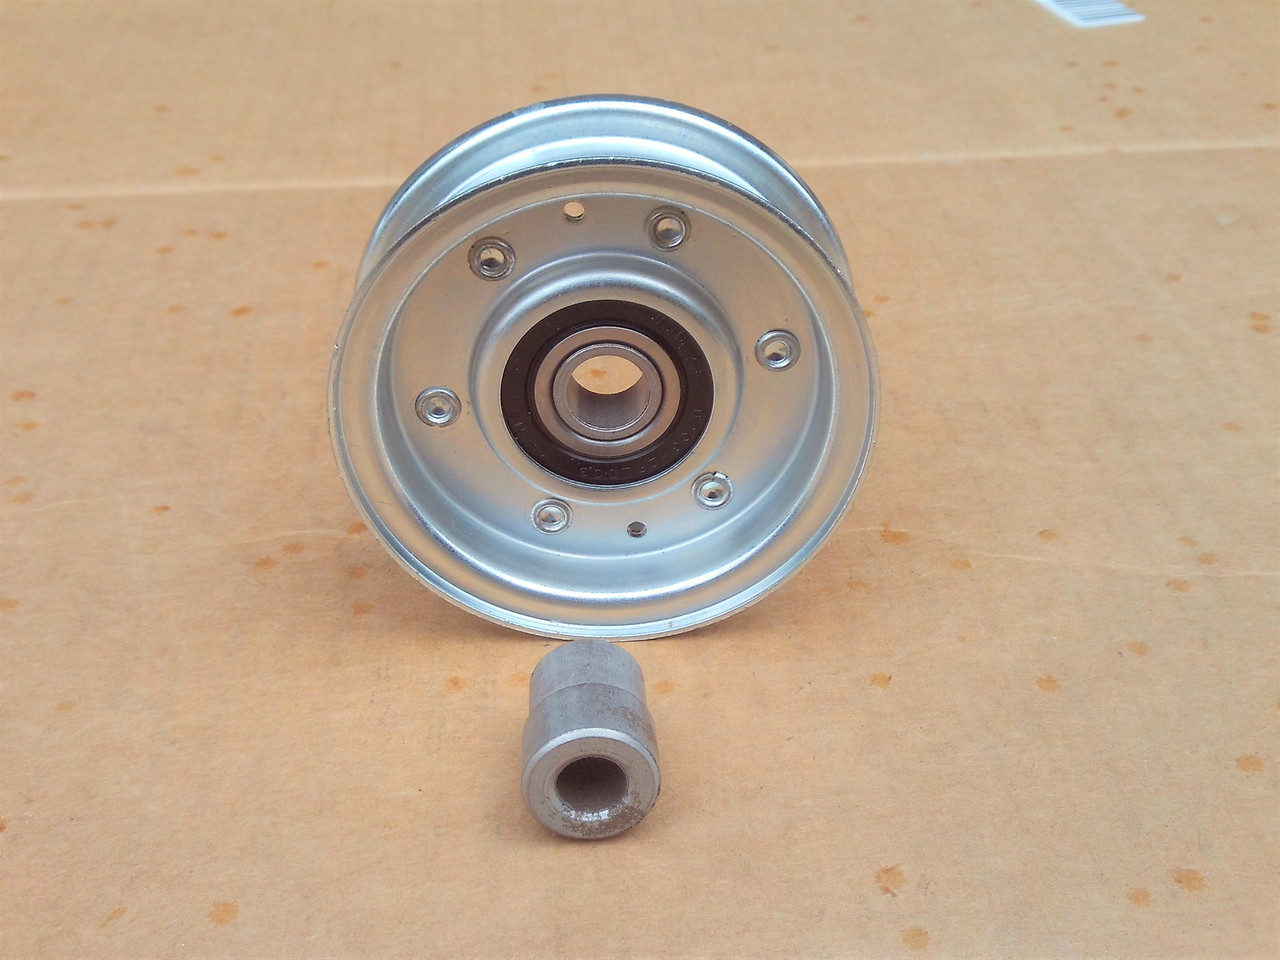 Flat Idler Pulley for Hahn 280156, OD: 3-1/4", ID: 1/2"